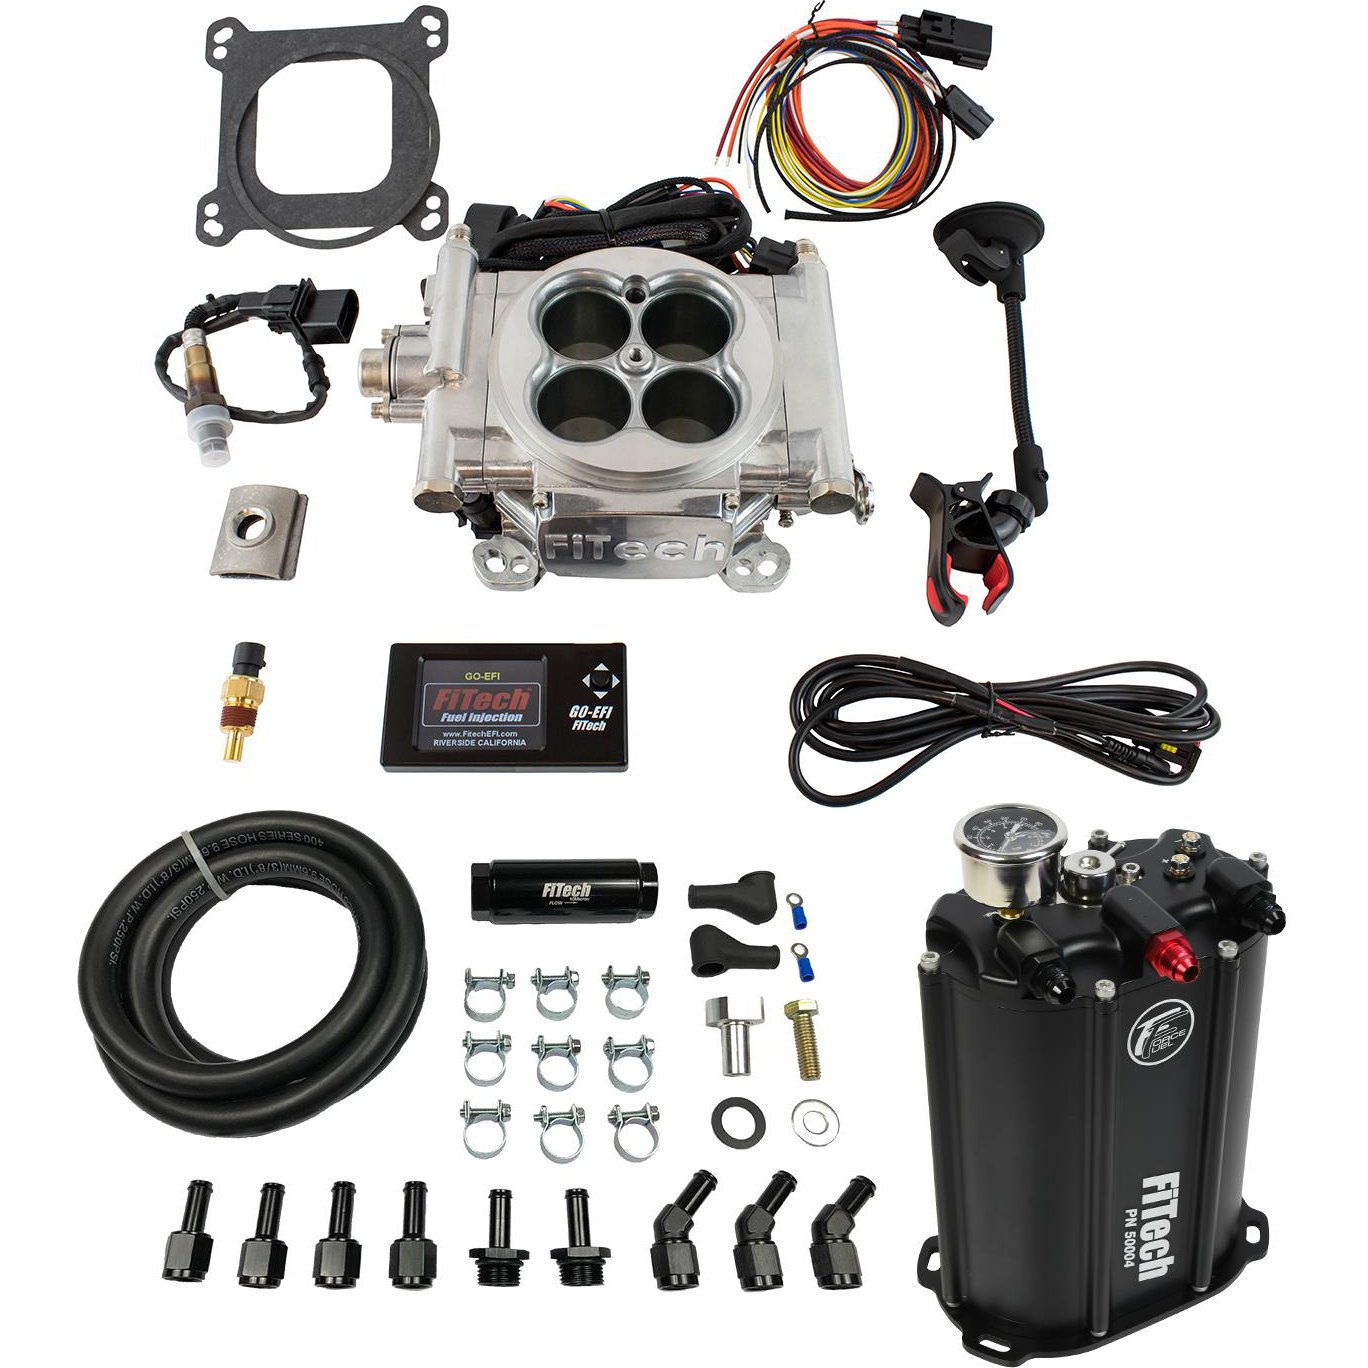 Go EFI-4 600 HP Throttle Body System Master Kit with Force Fuel System